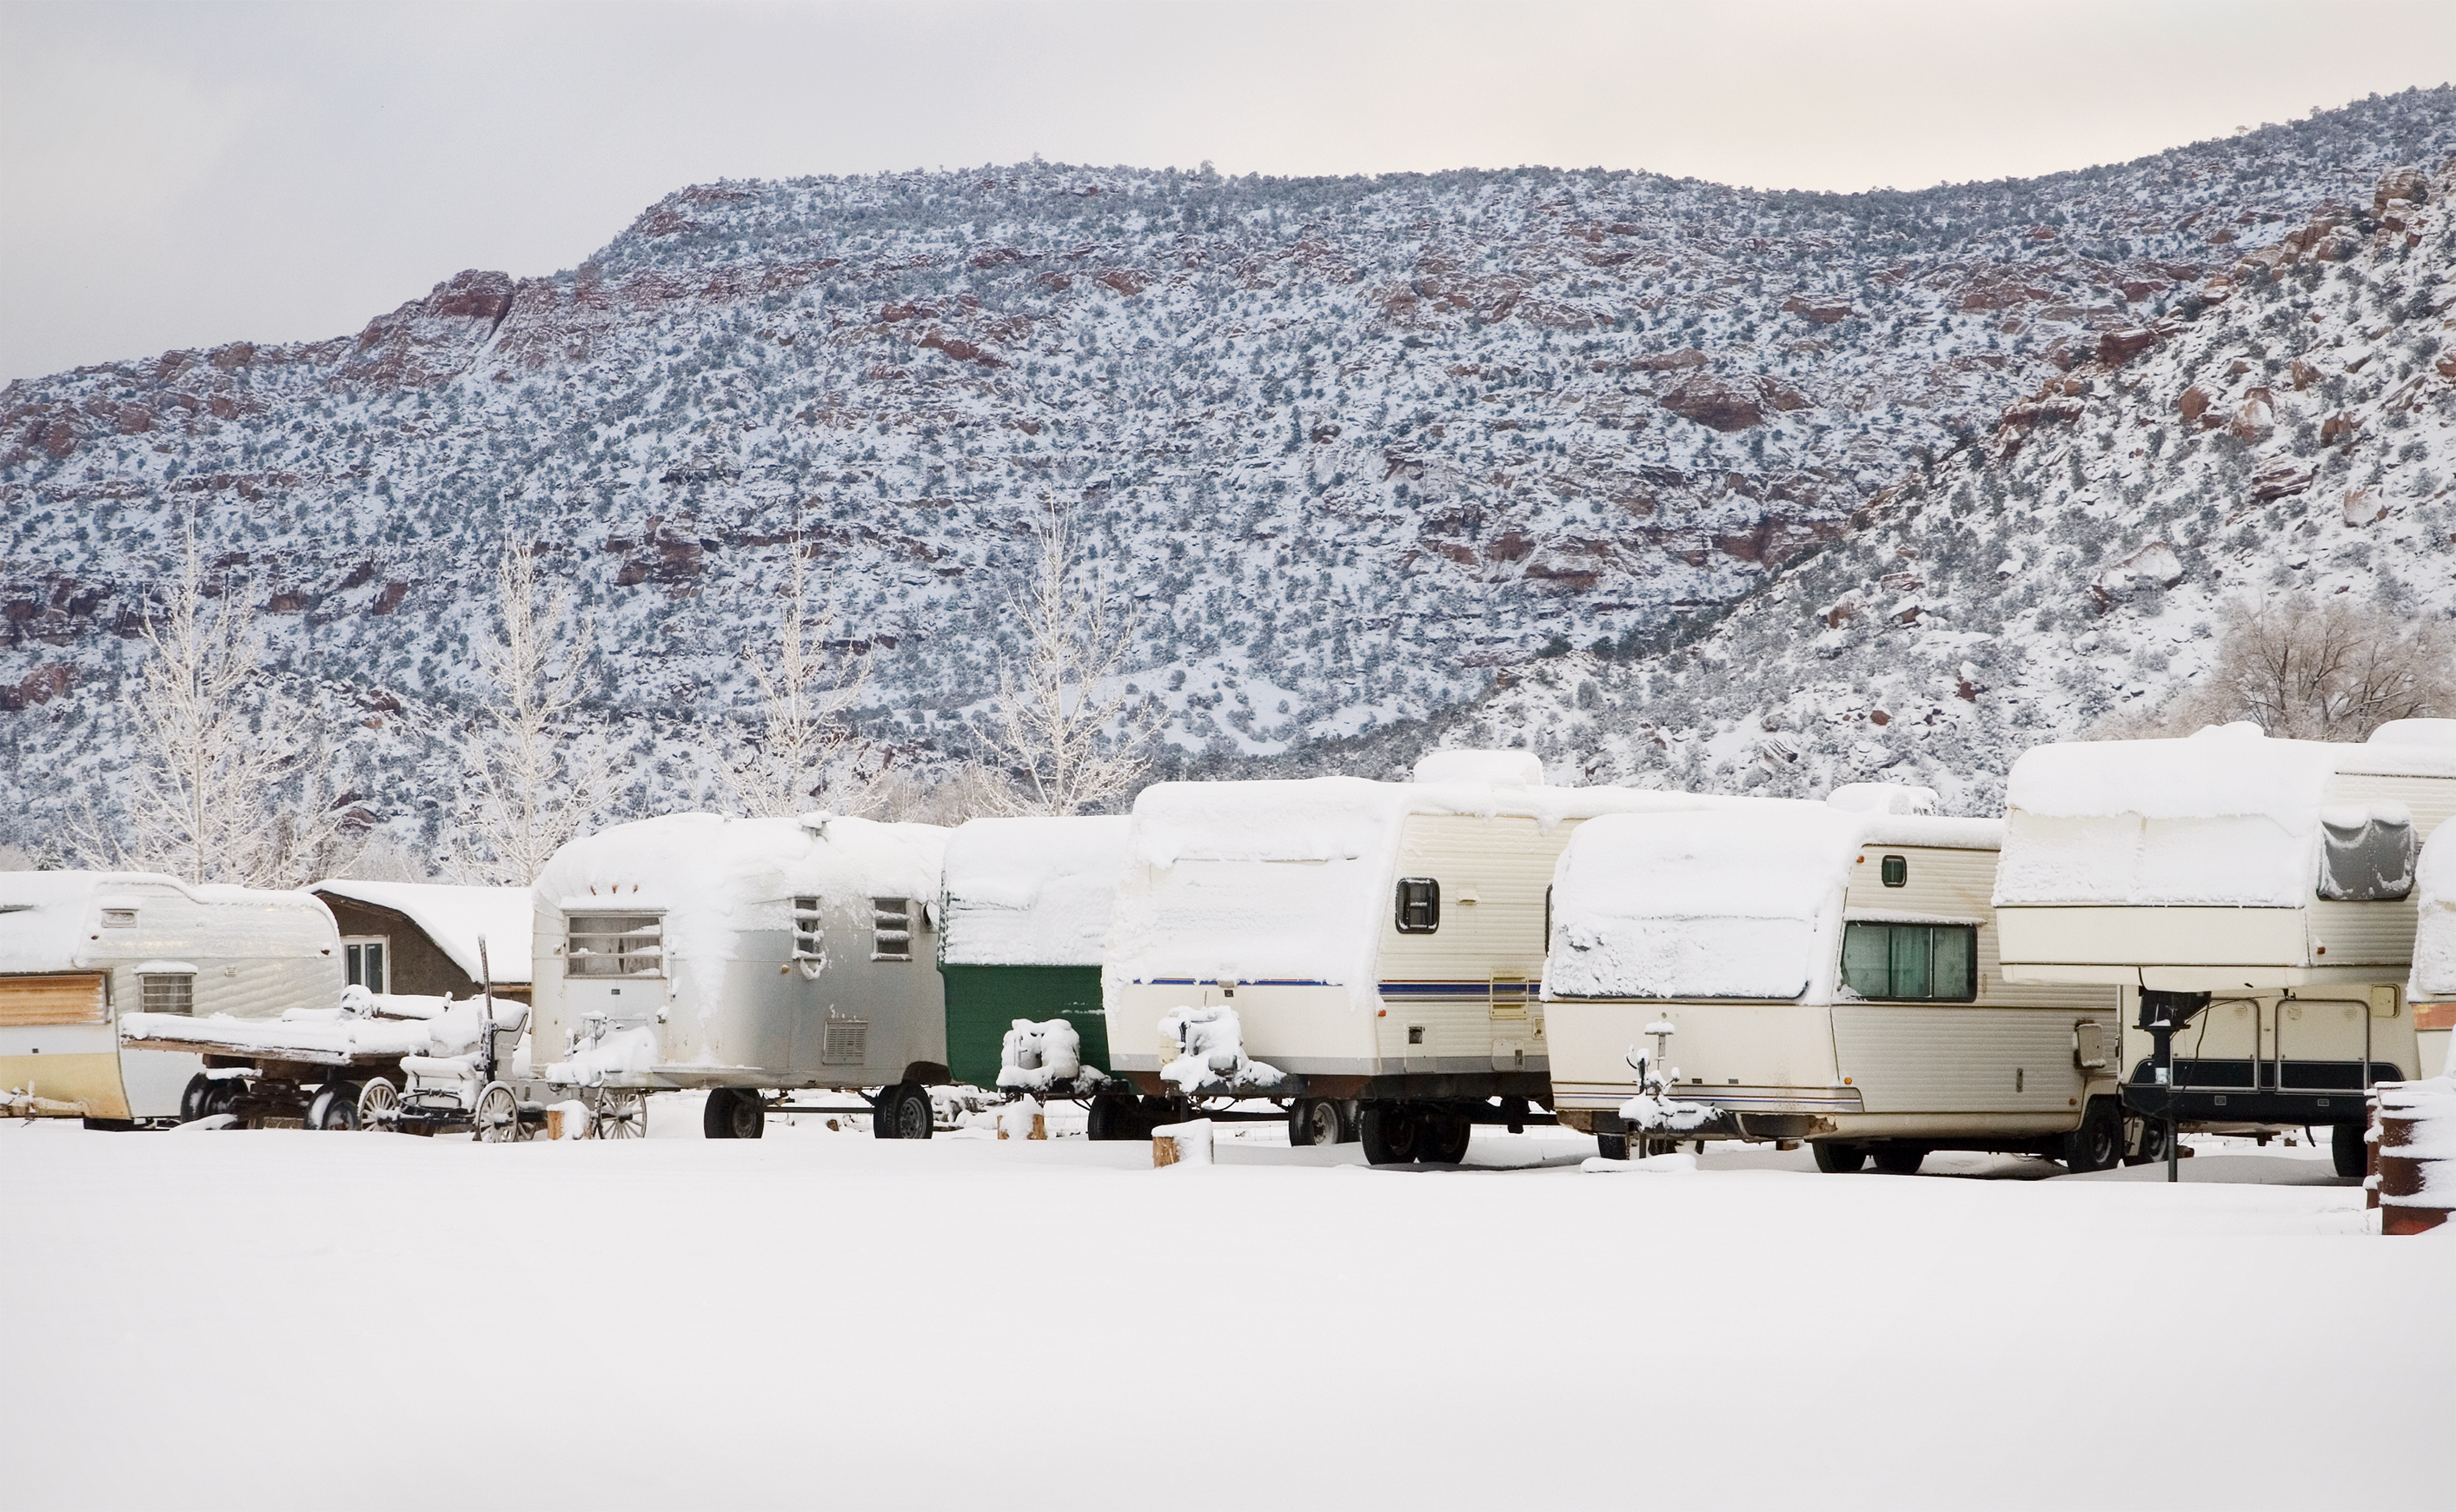 RVs Made for Winter: The Cold Is No Problem